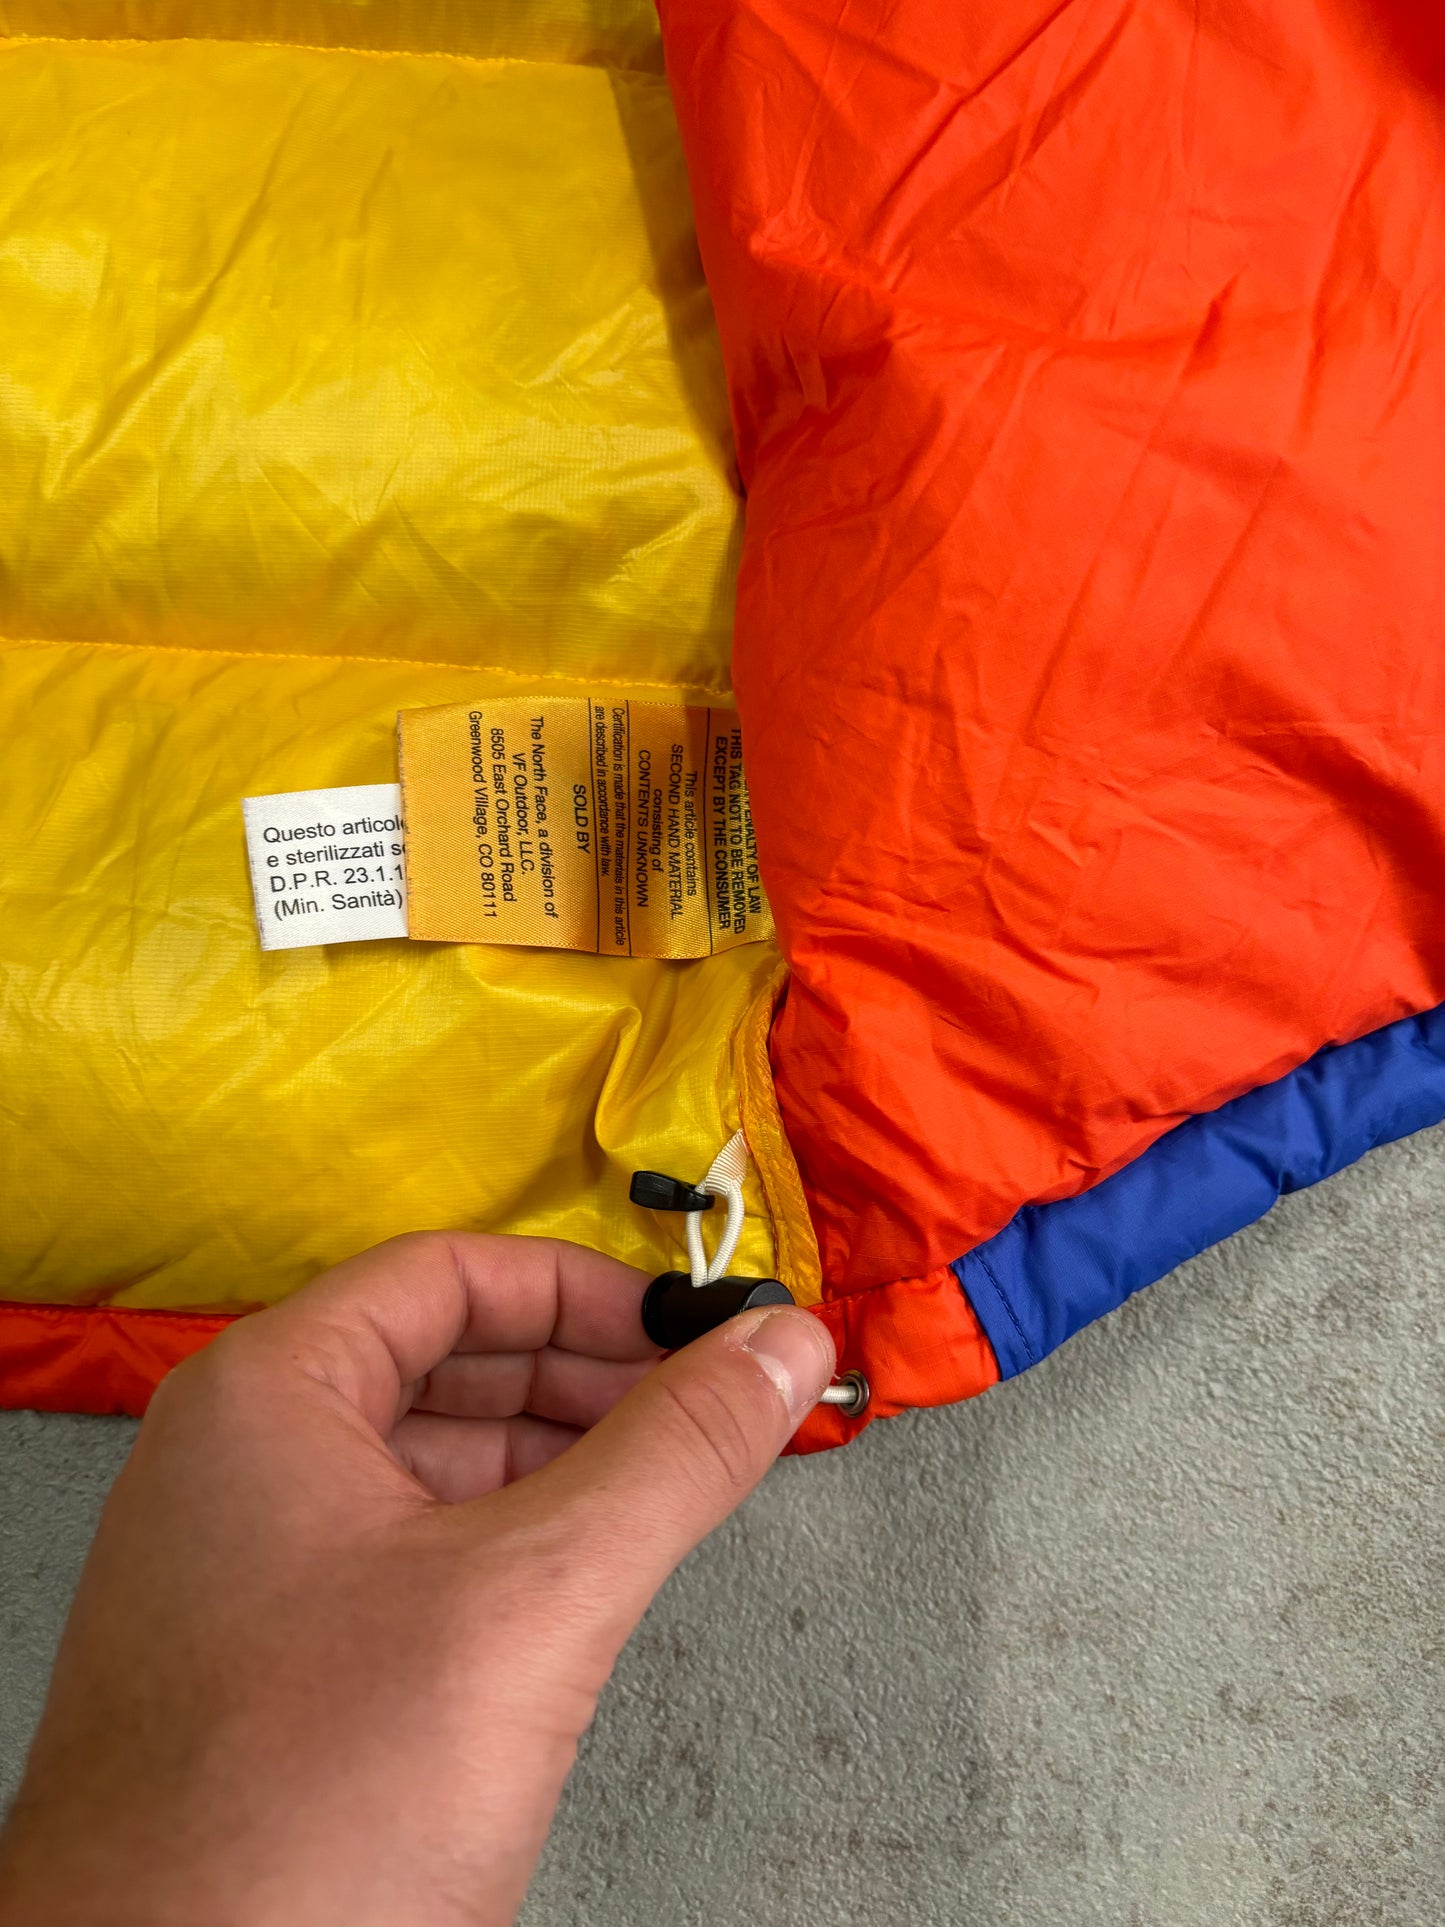 The North Face 600 Big Logo Reissue Puffer Jacket - XL